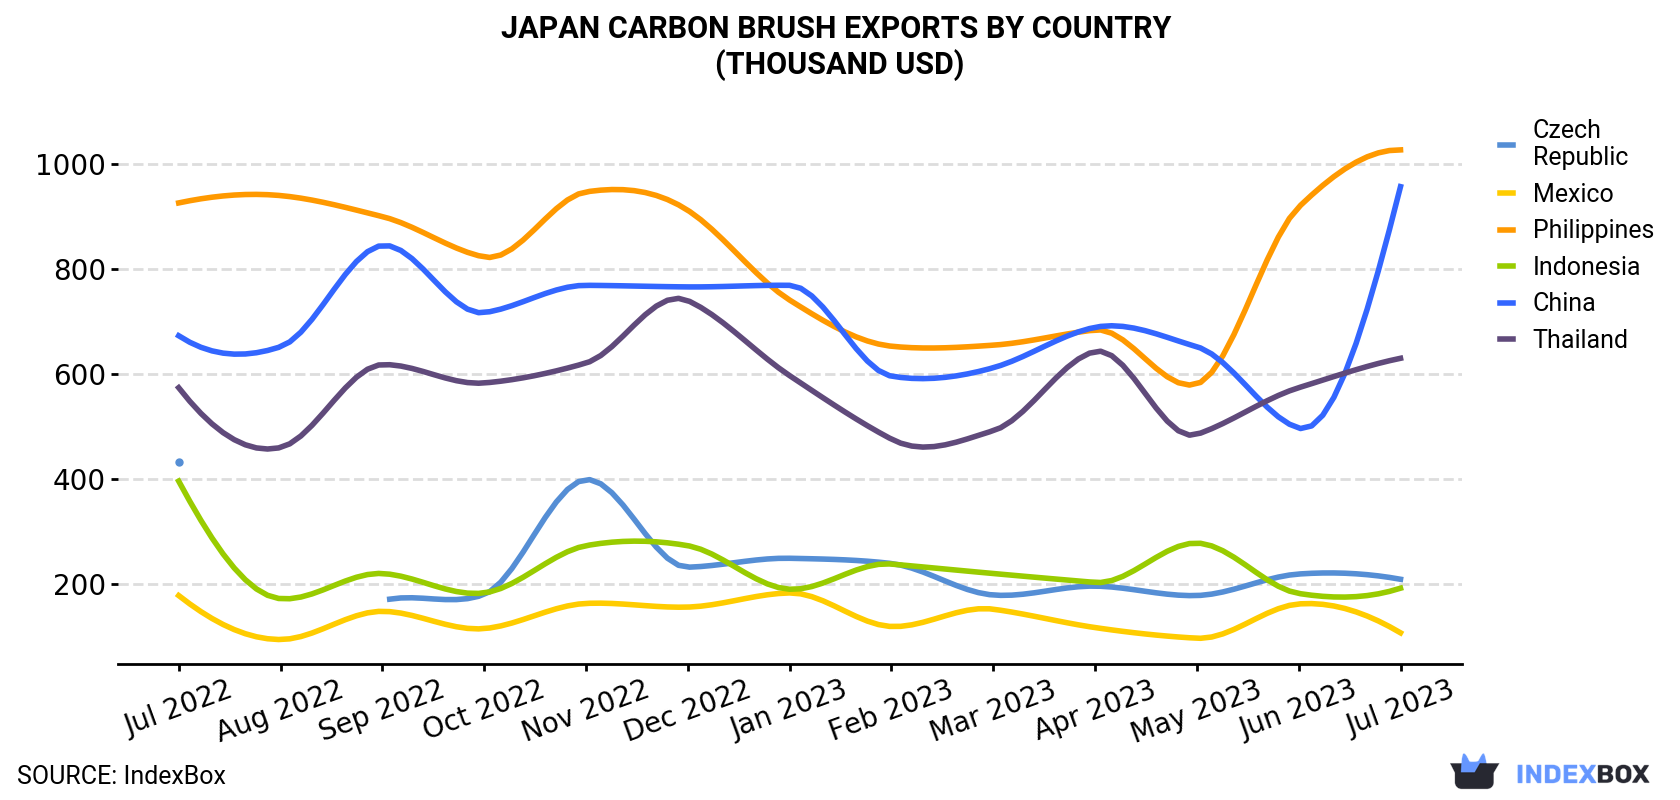 Japan Carbon Brush Exports By Country (Thousand USD)